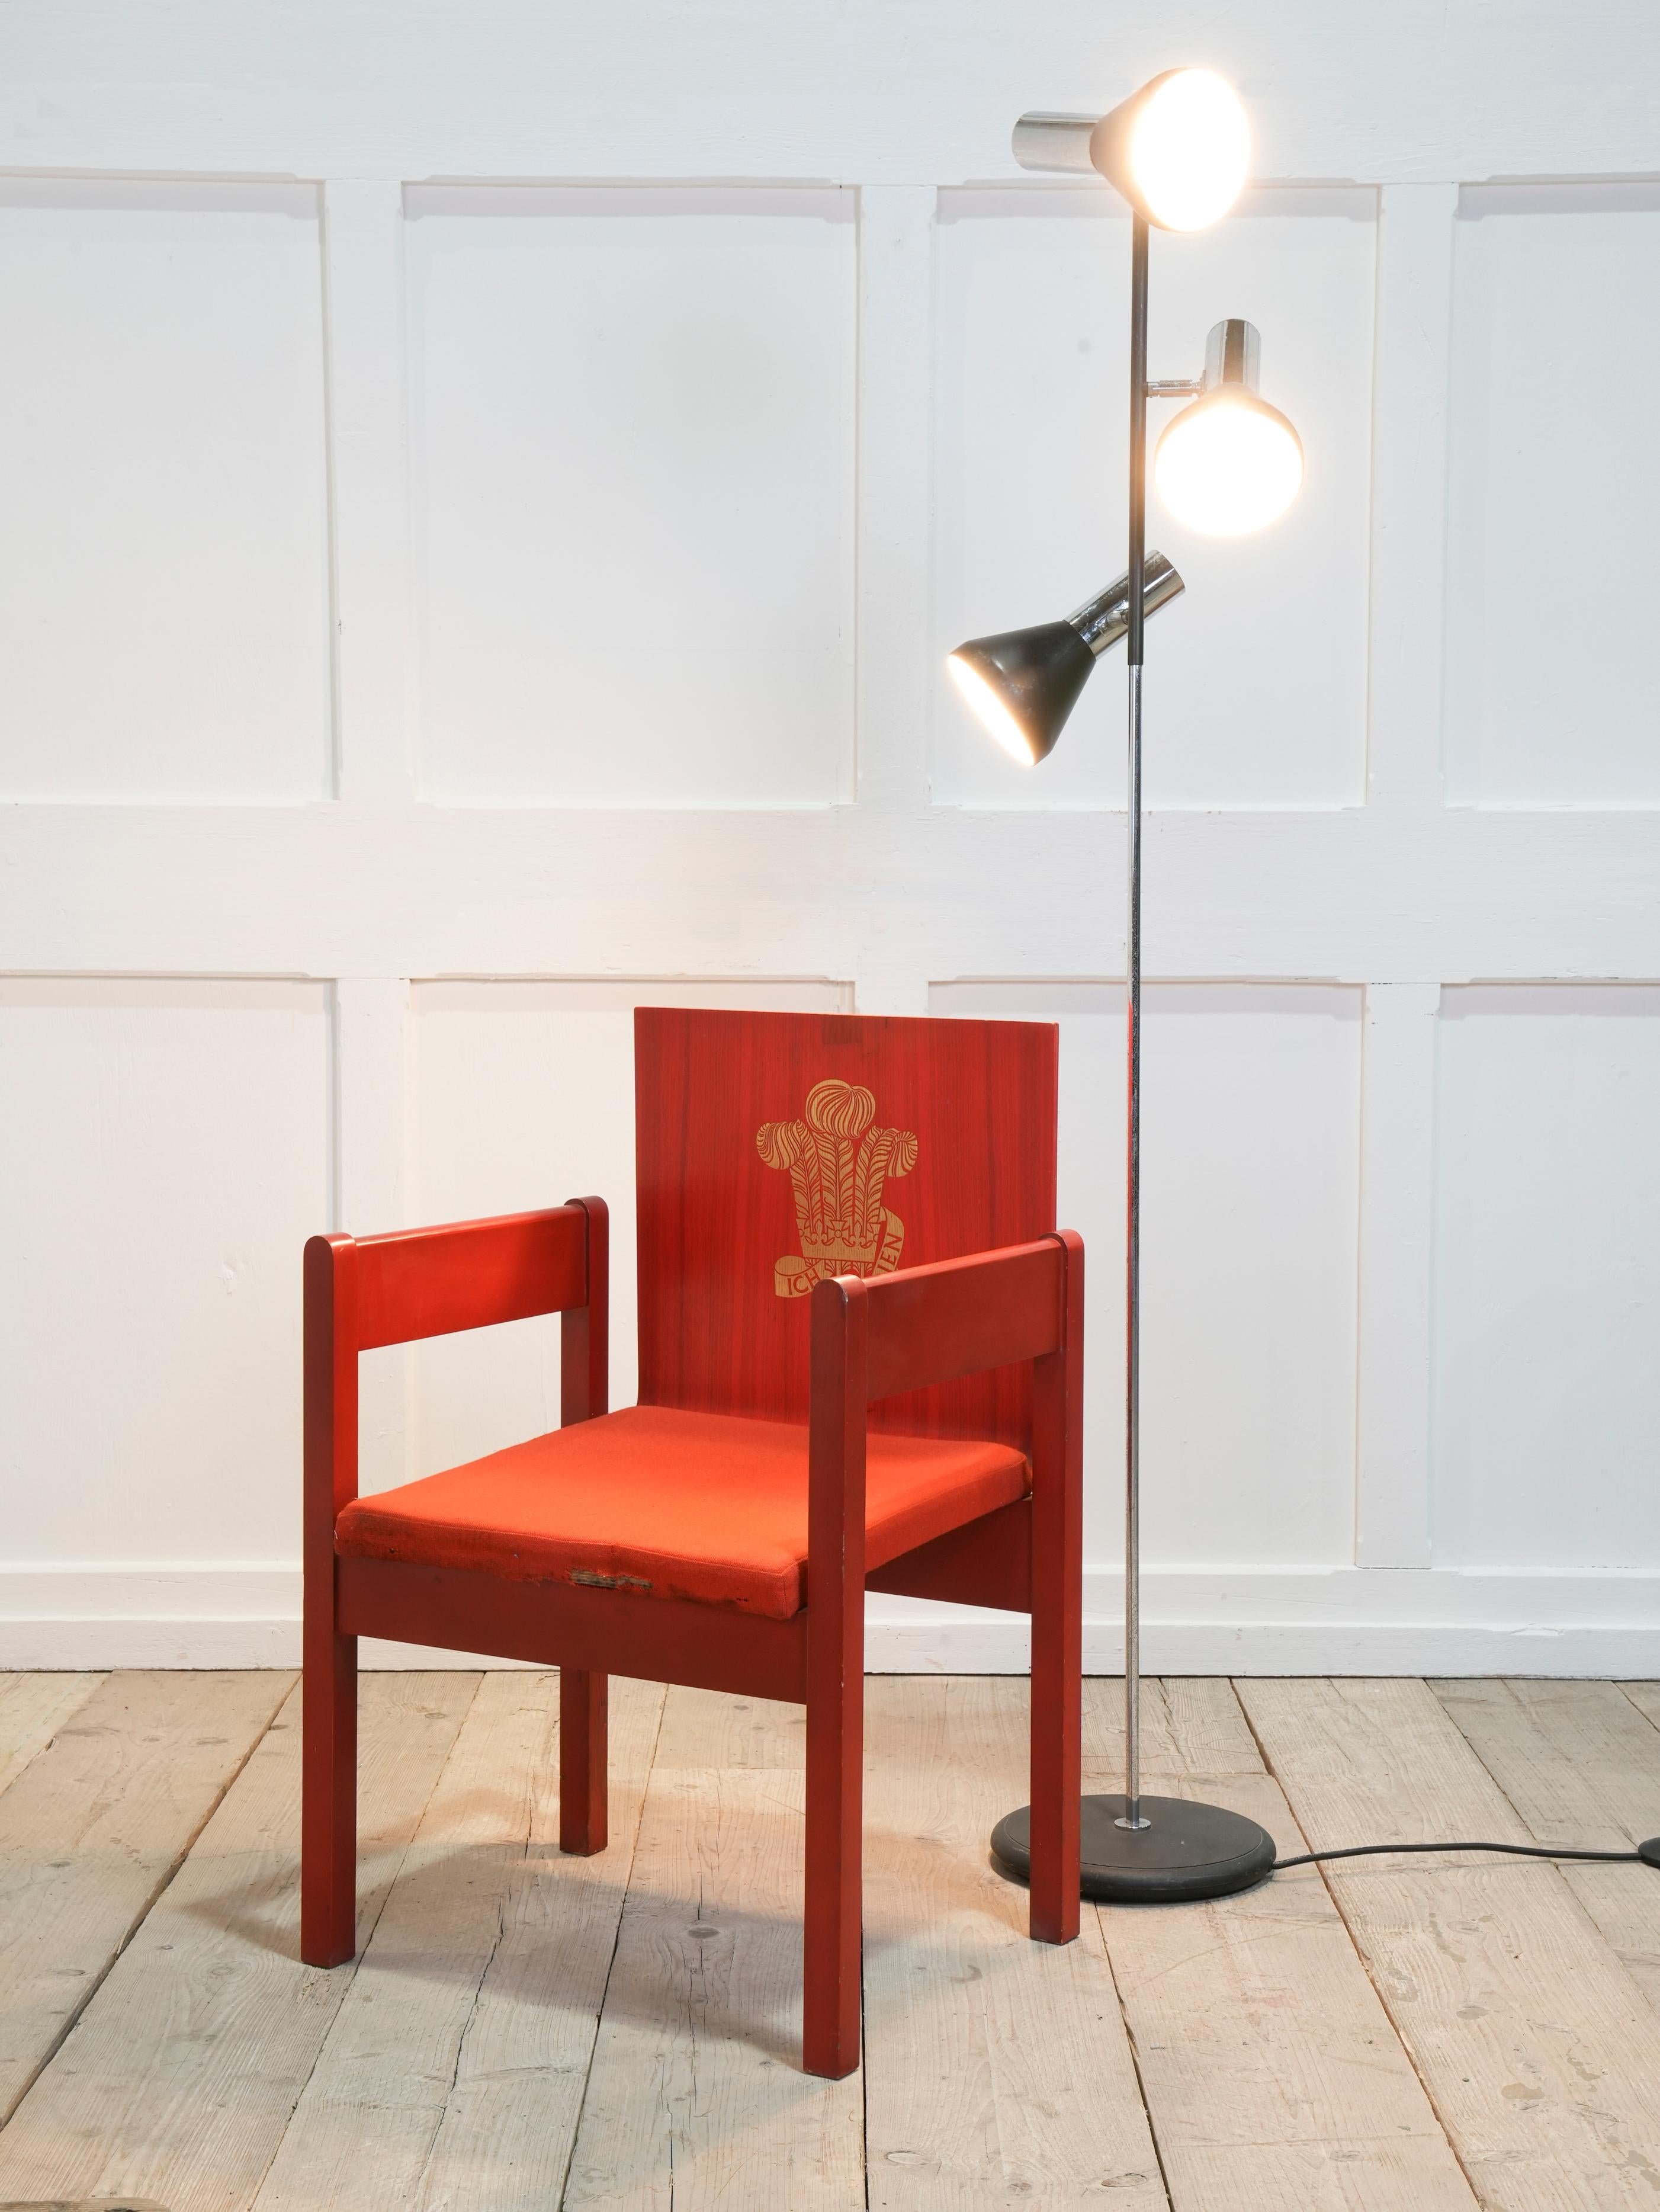 An Investiture “Red” Chair 2